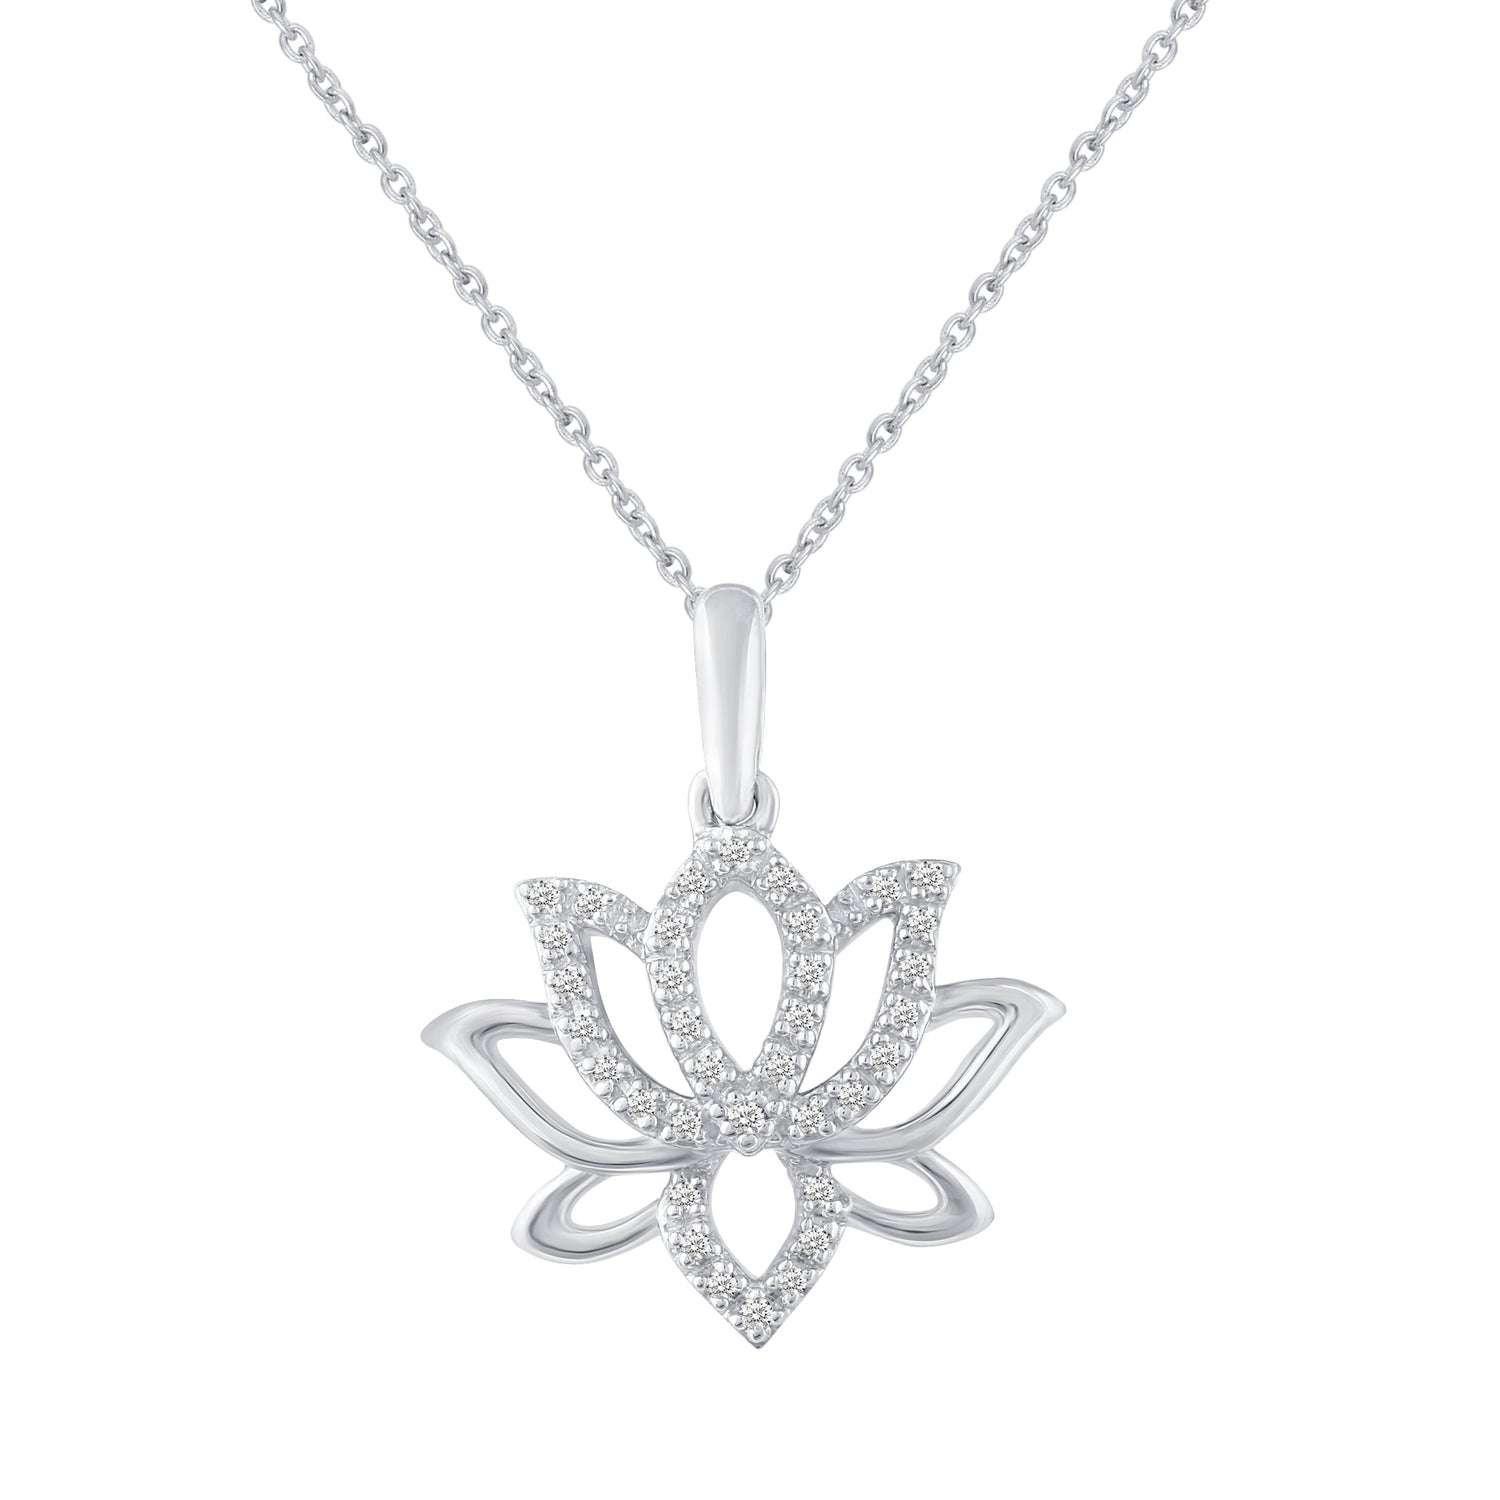 1/10 CT TW Diamond Lotus Pave Pendant Set in Sterling Silver